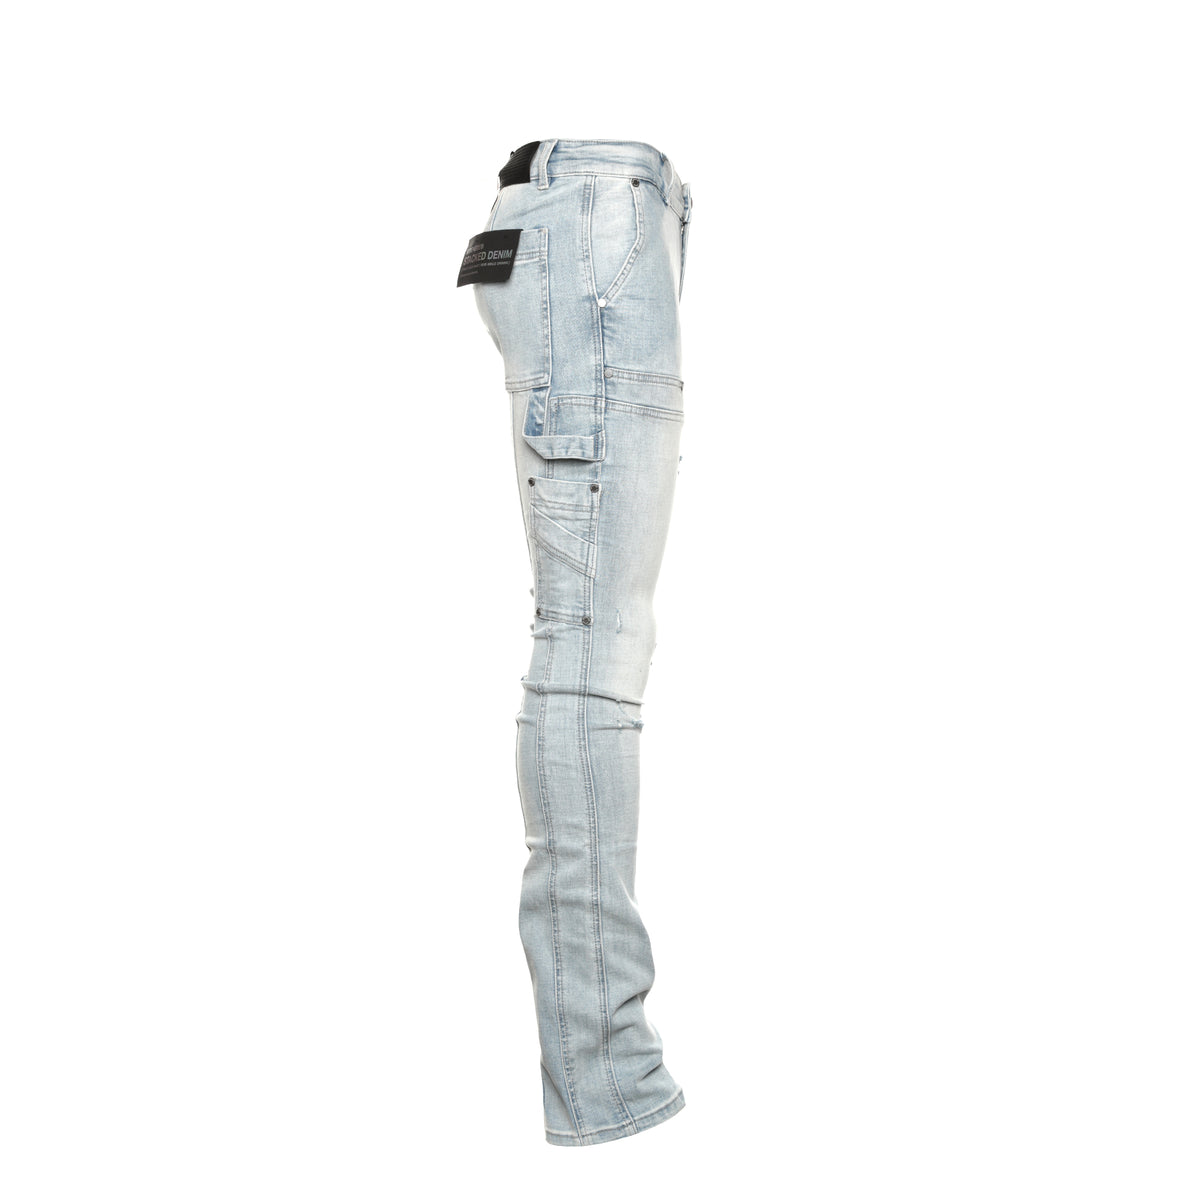 Serenede "Sky" Men's Stacked Jeans - SIZE Boutique